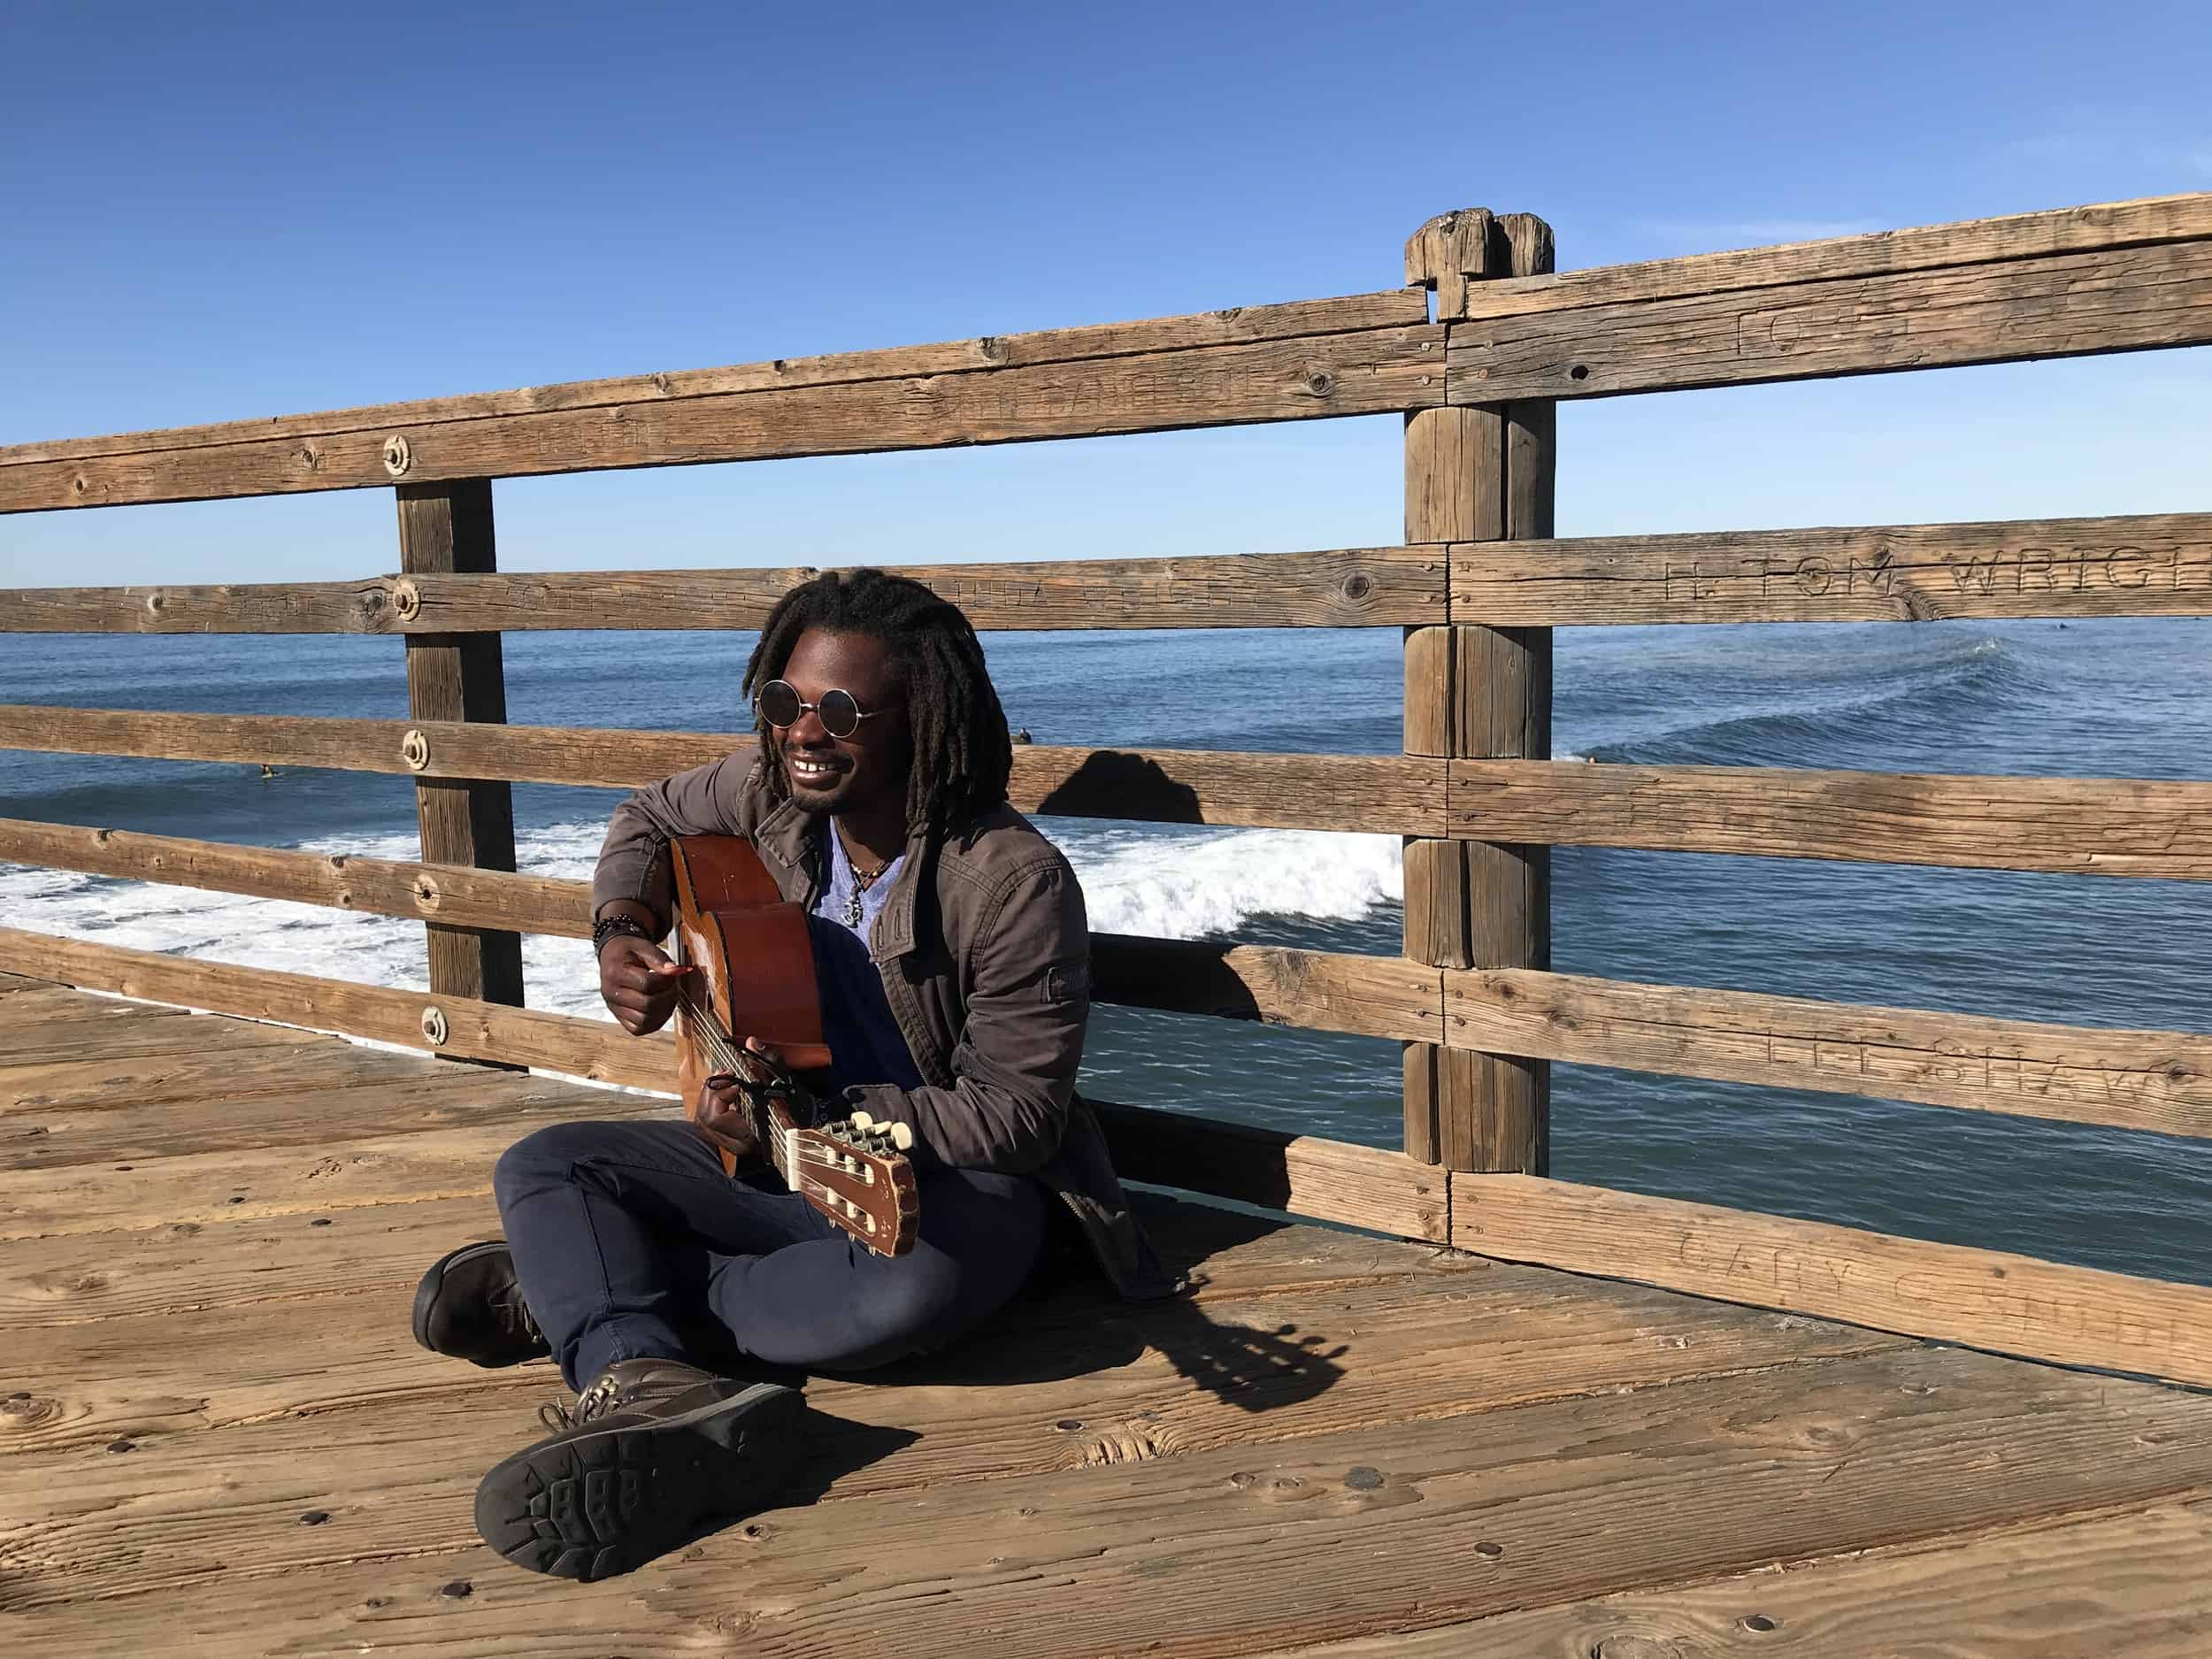 The kowboy rasta musican plays his acoustic guitar while sitting on the pier's floor. he is leaning against the fence of the pier. Beyond the pier is the Pacific Ocean and a long ocean wave. Dark blue waters. Oceanside Pier in downtown Oceanside, California, United States of America